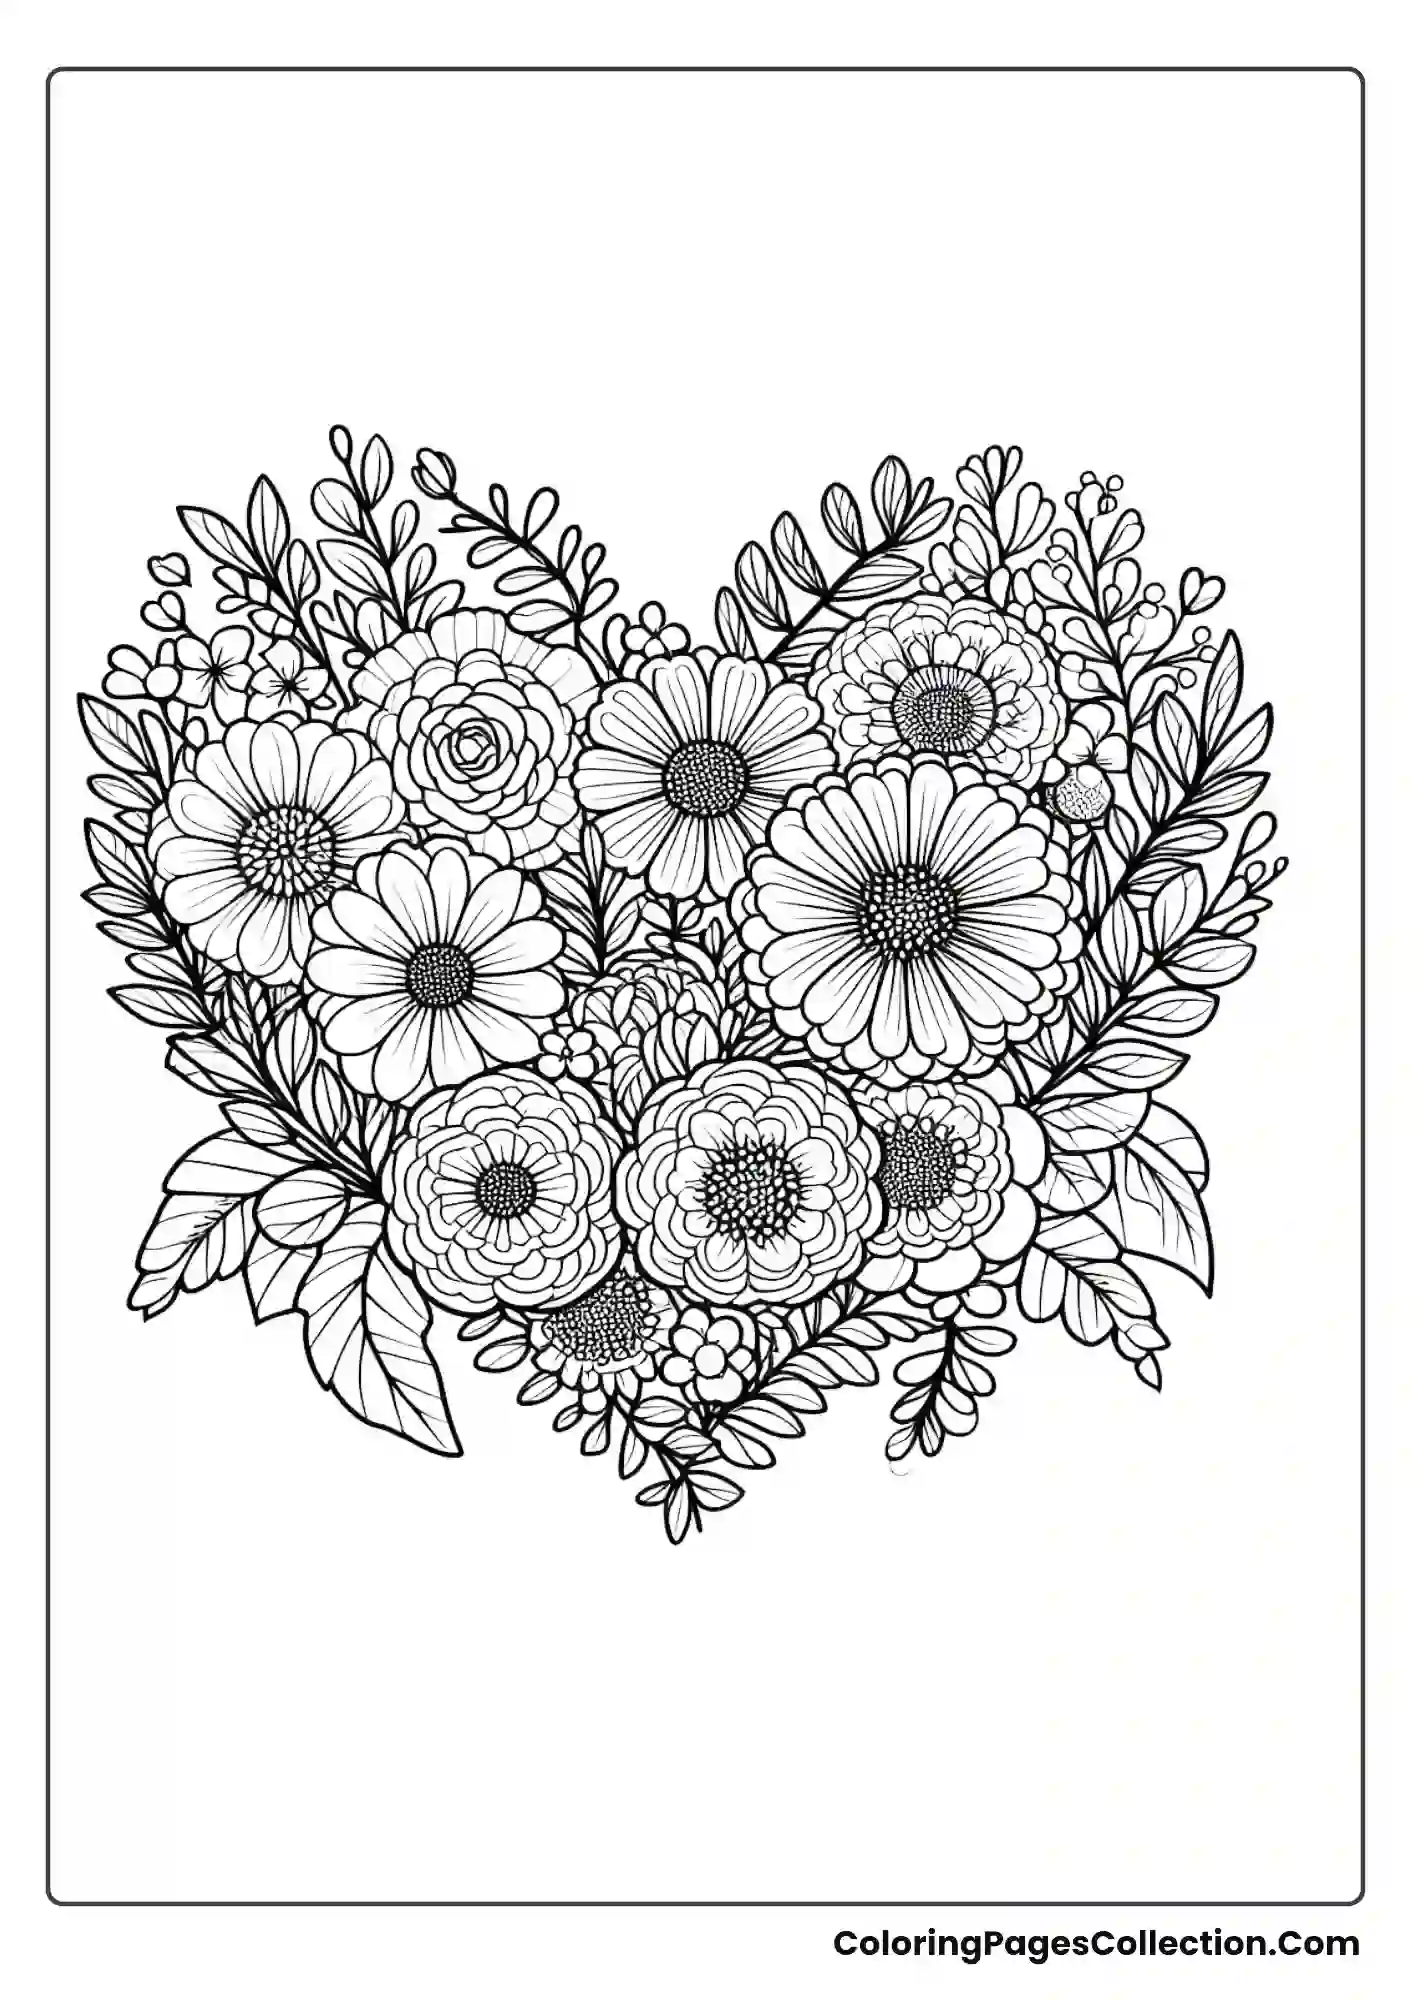 A Bouquet Of Flowers Inside A Large Heart Outline